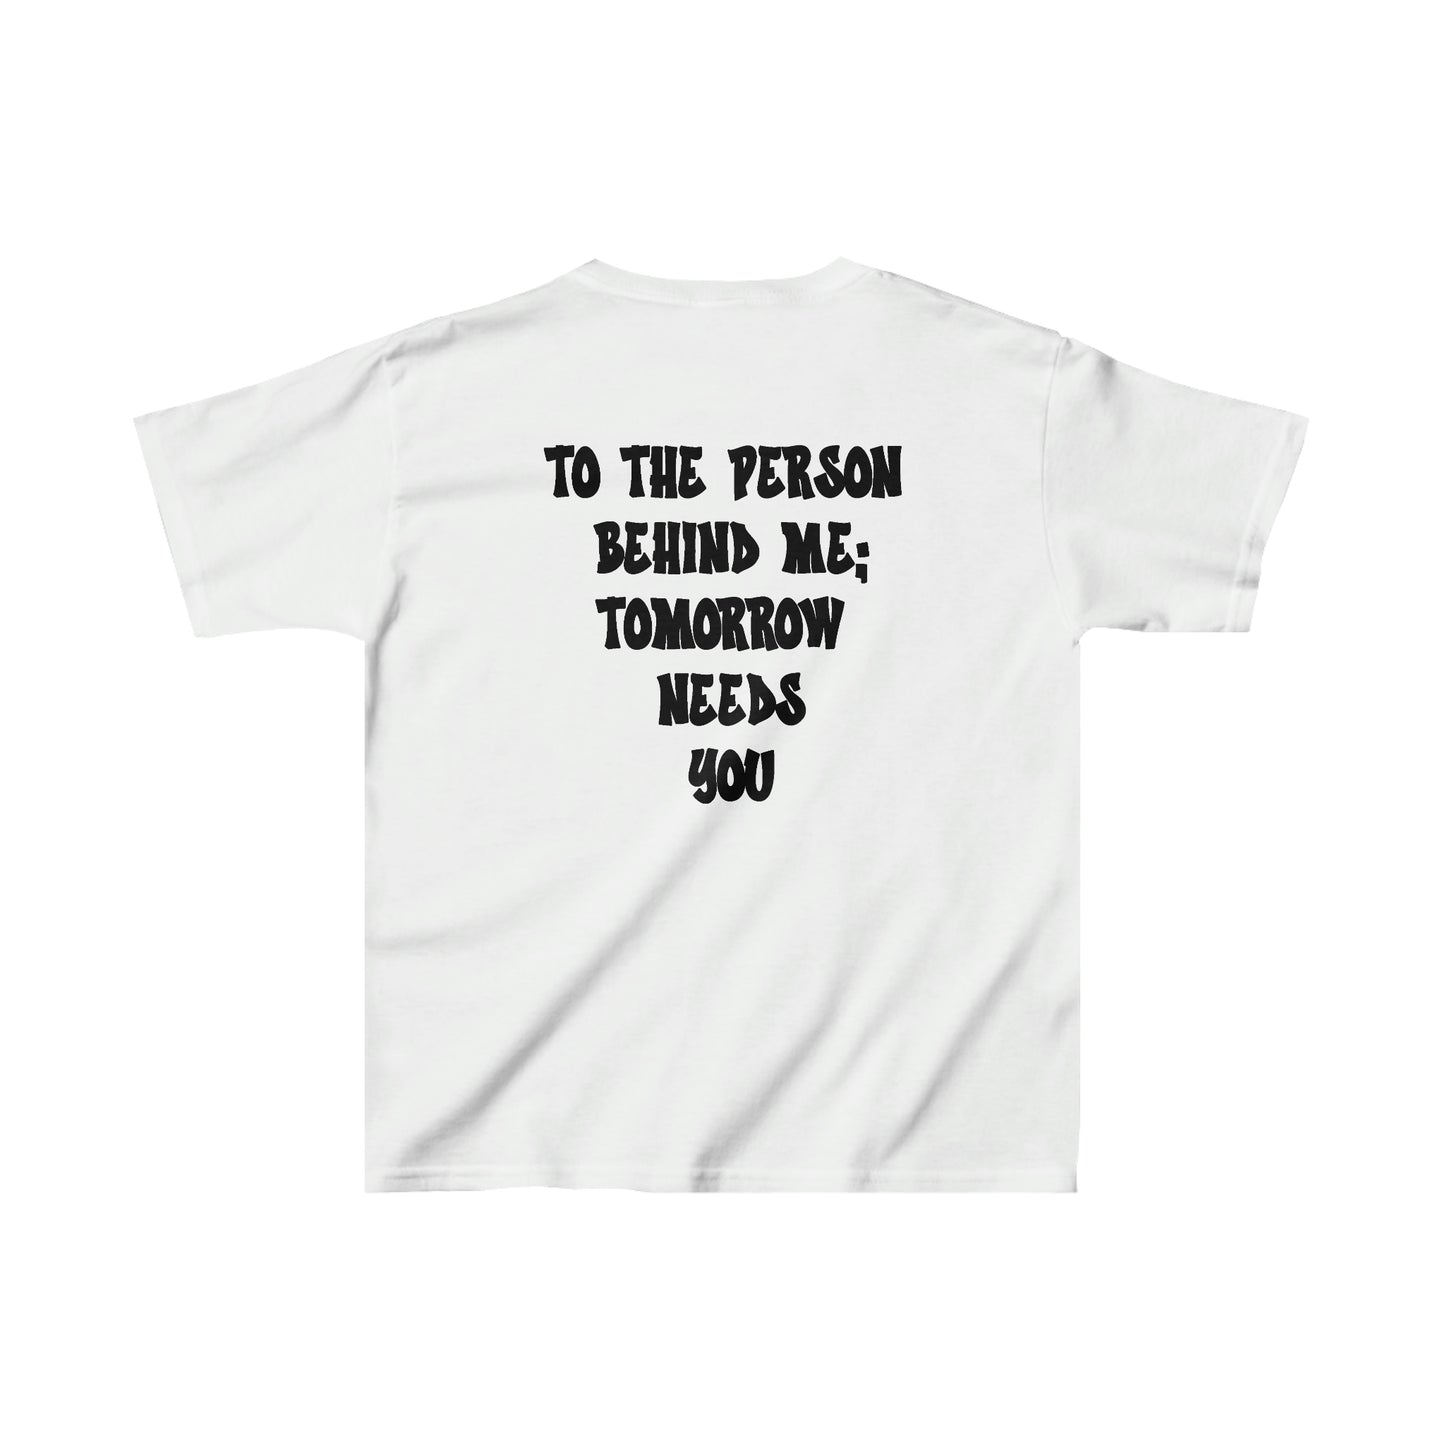 Kids "To The Person Behind Me" T-Shirt